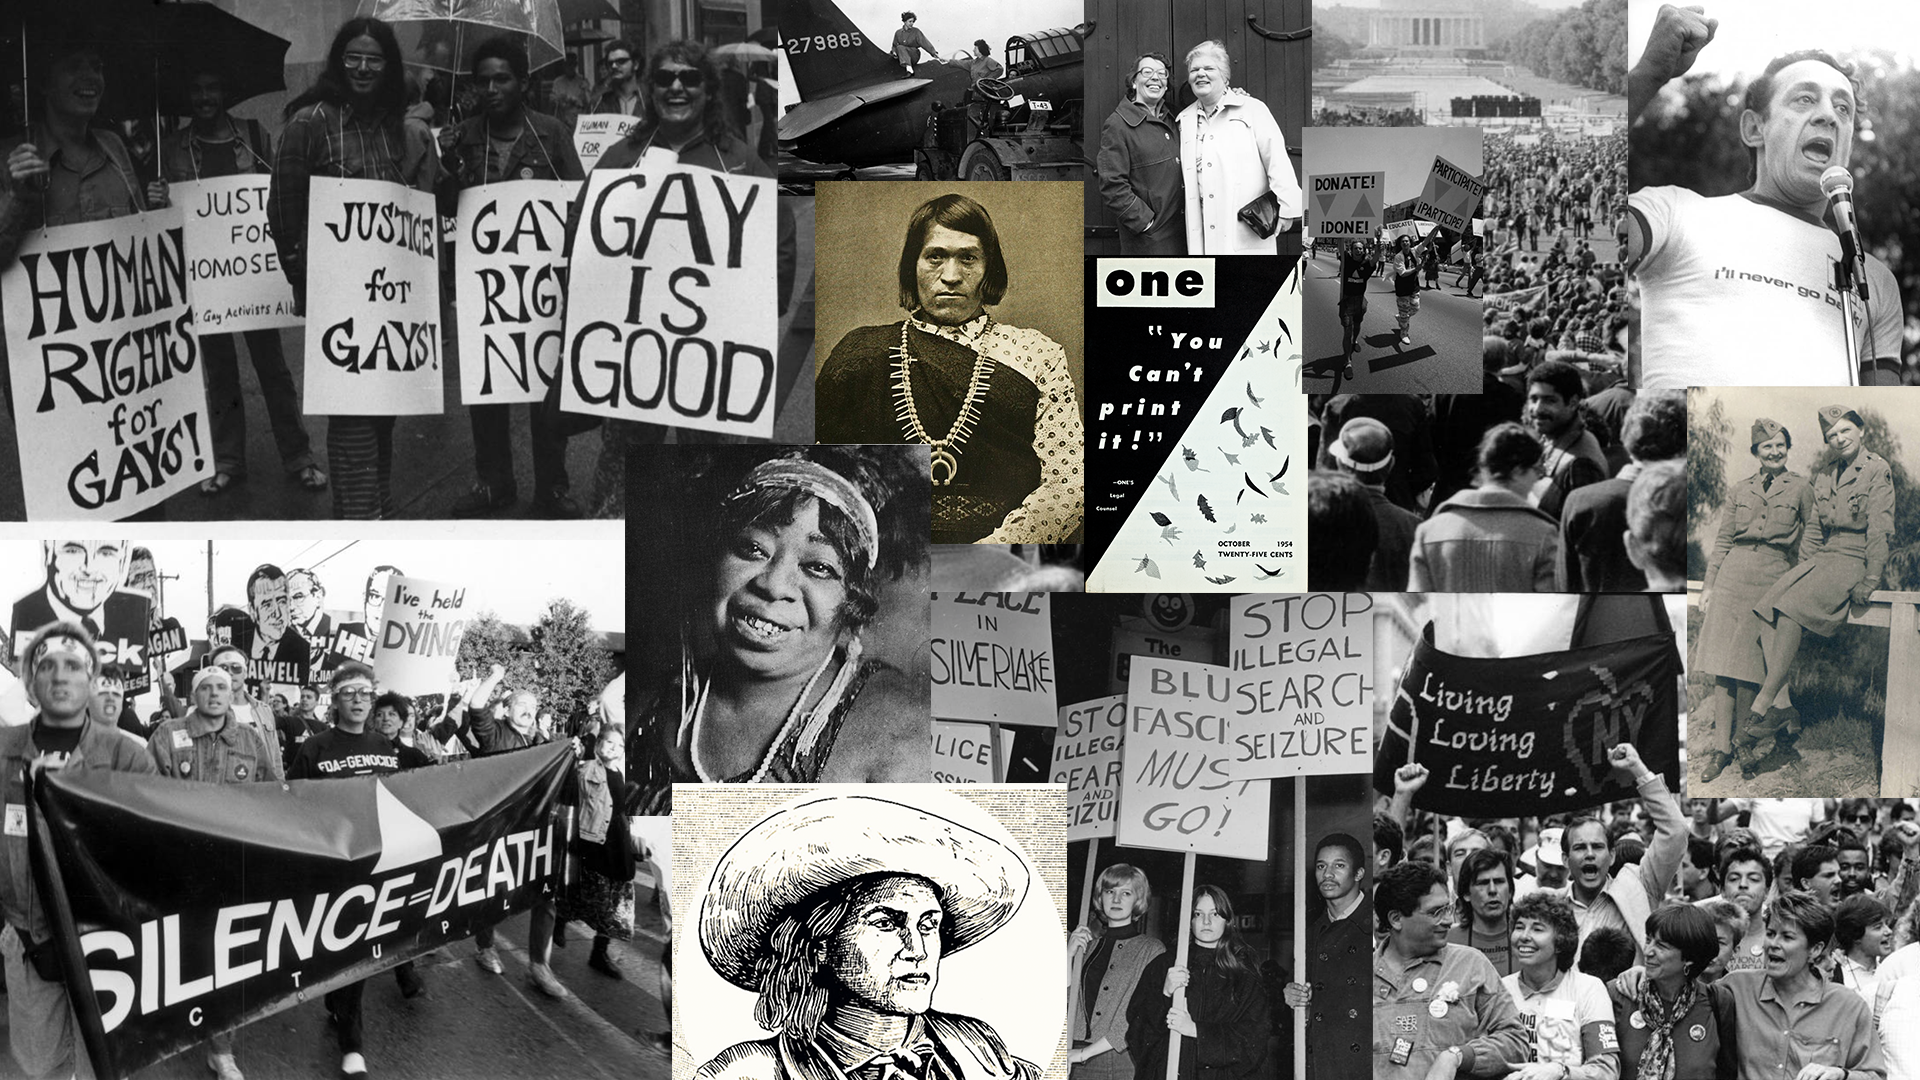 gay rights movement timeline